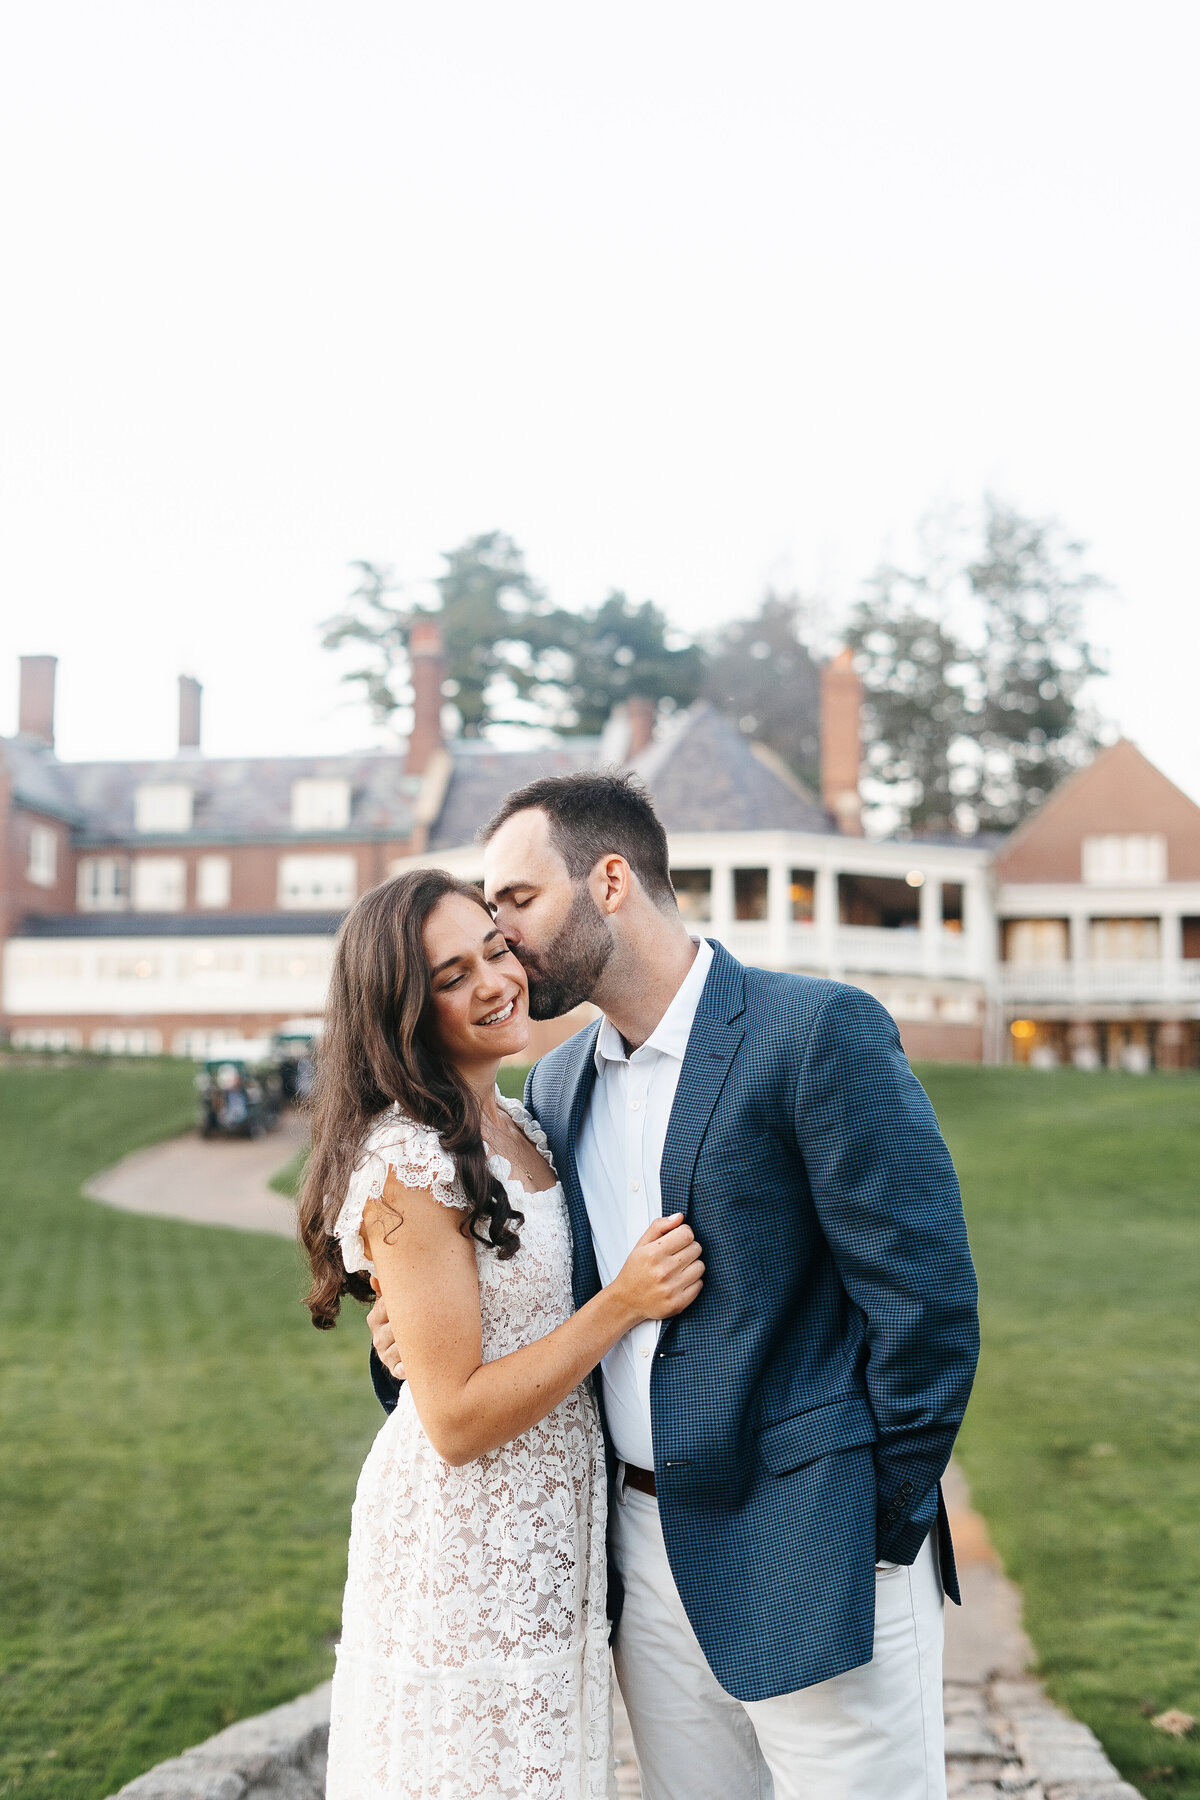 Timeless Love: A beautiful moment captured in engagement photos by Danielle Littles Photography, showcasing the genuine connection and joy between the enchanting couple.